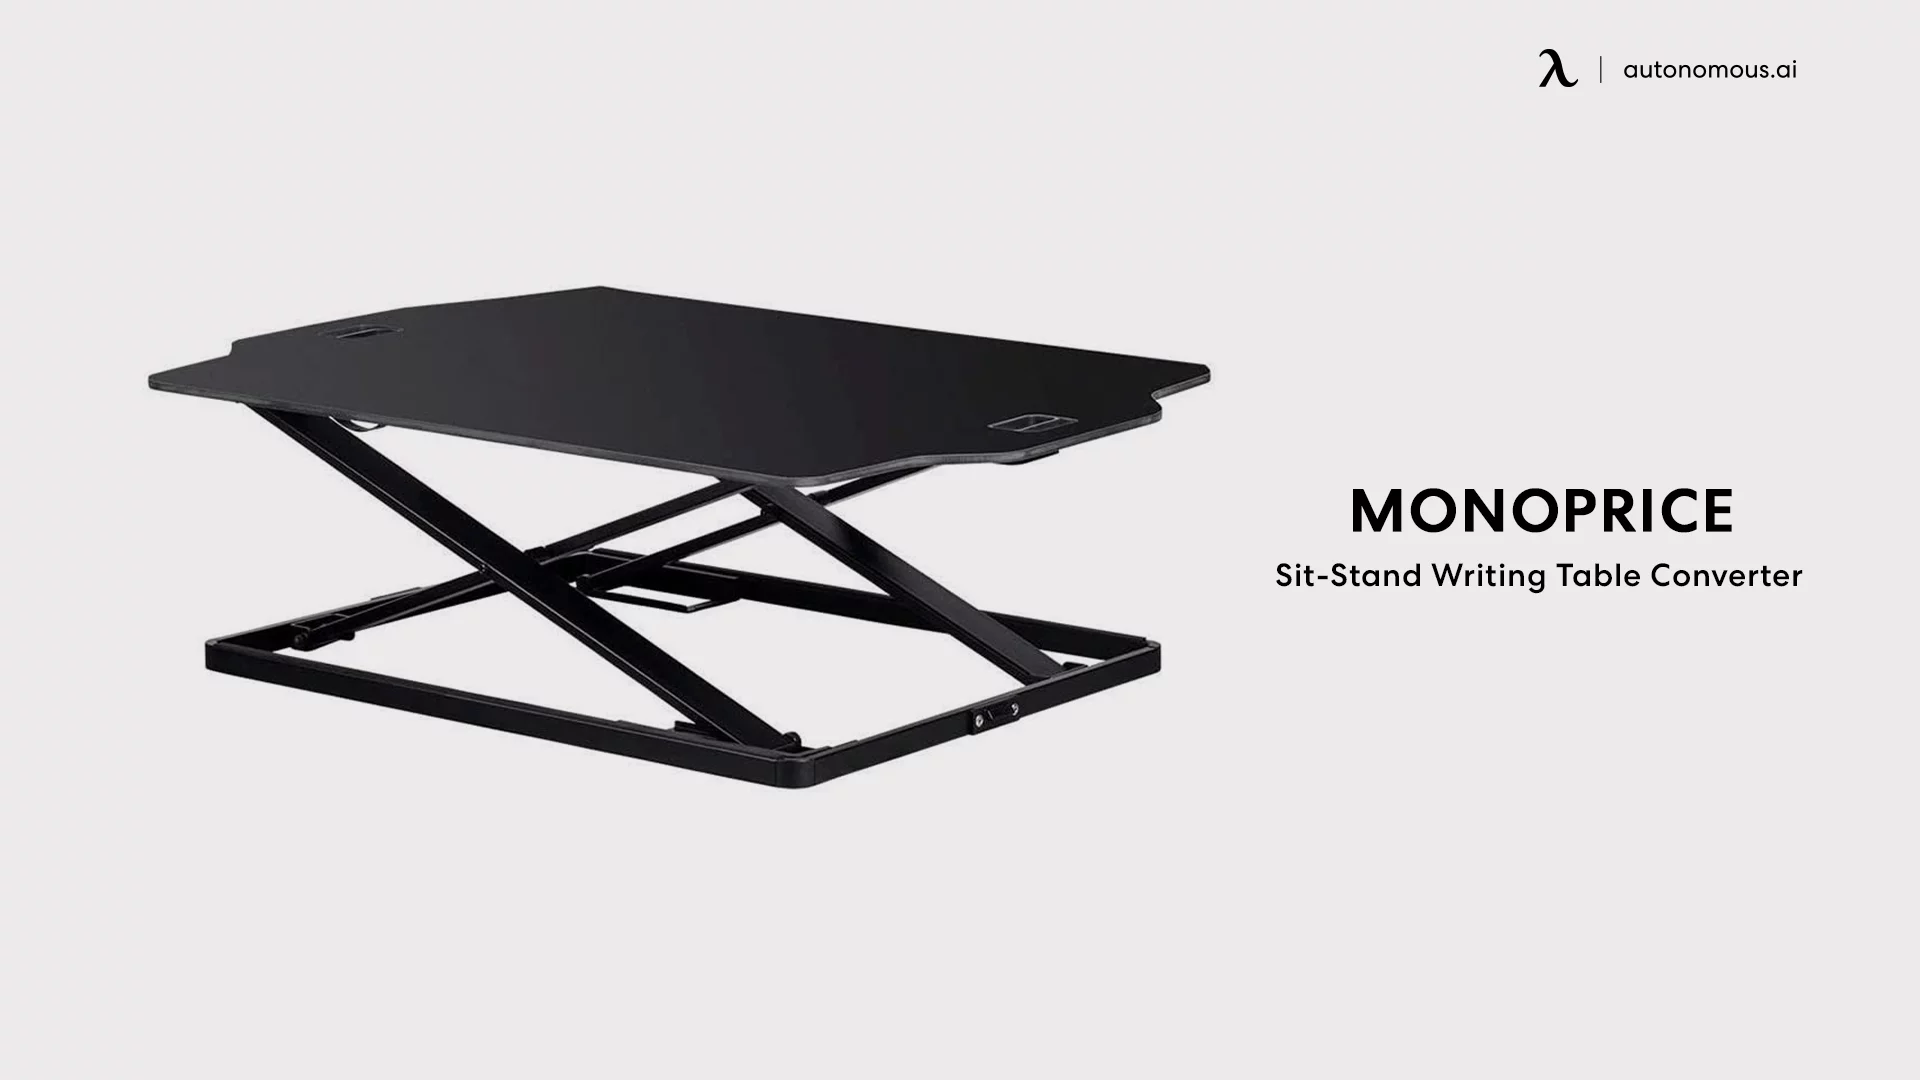 Monoprice Sit-Stand Writing Table Converter